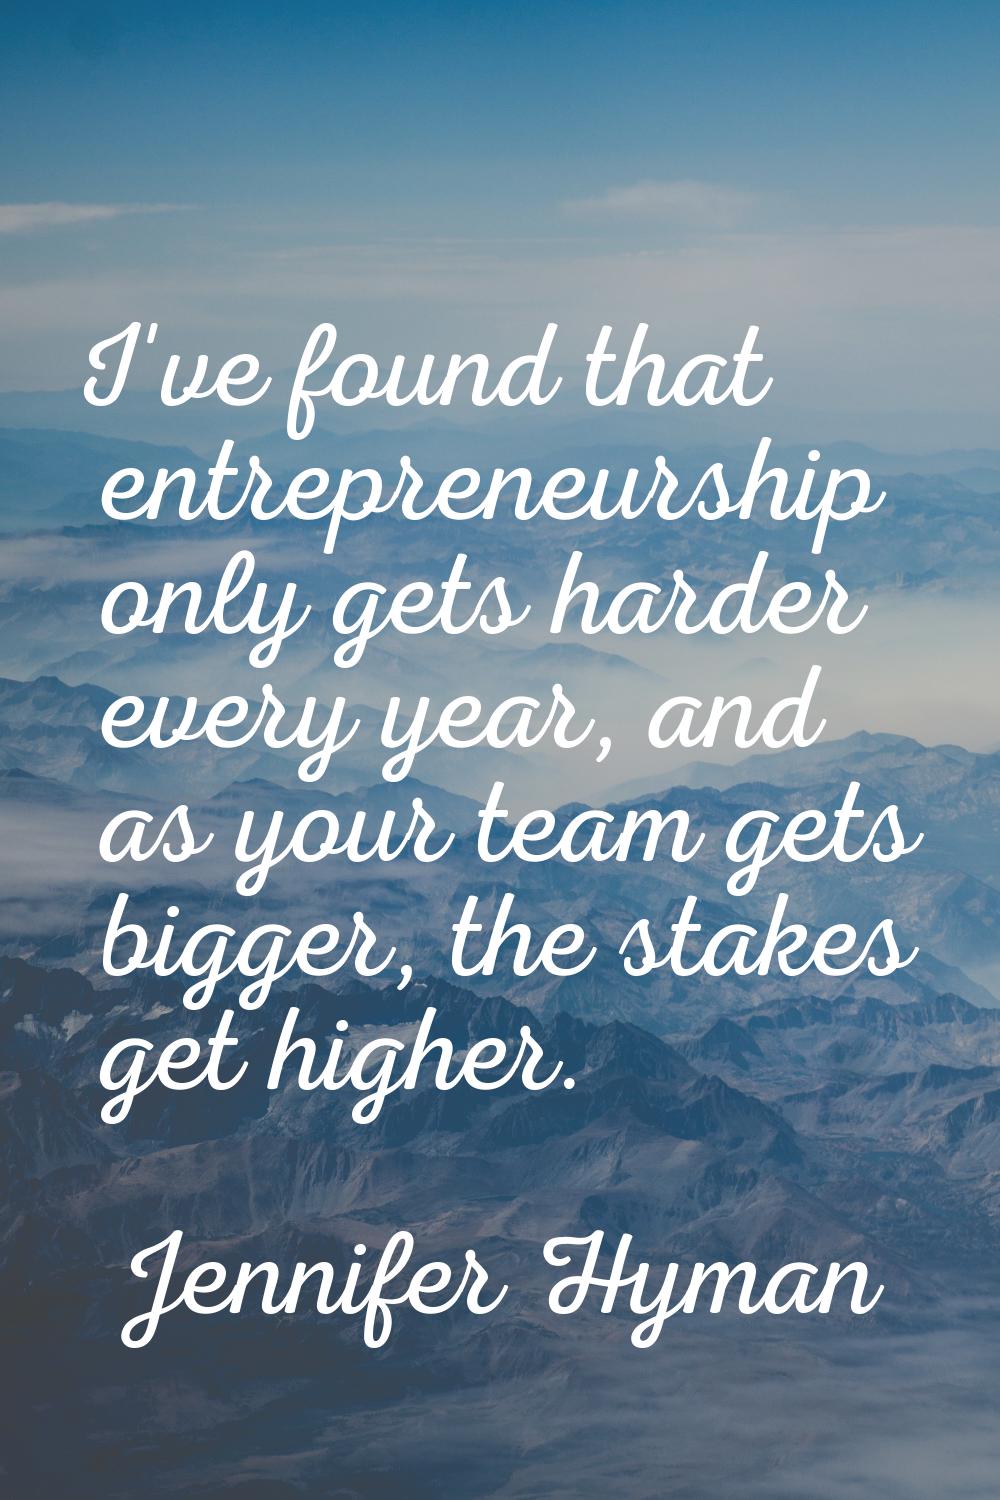 I've found that entrepreneurship only gets harder every year, and as your team gets bigger, the sta